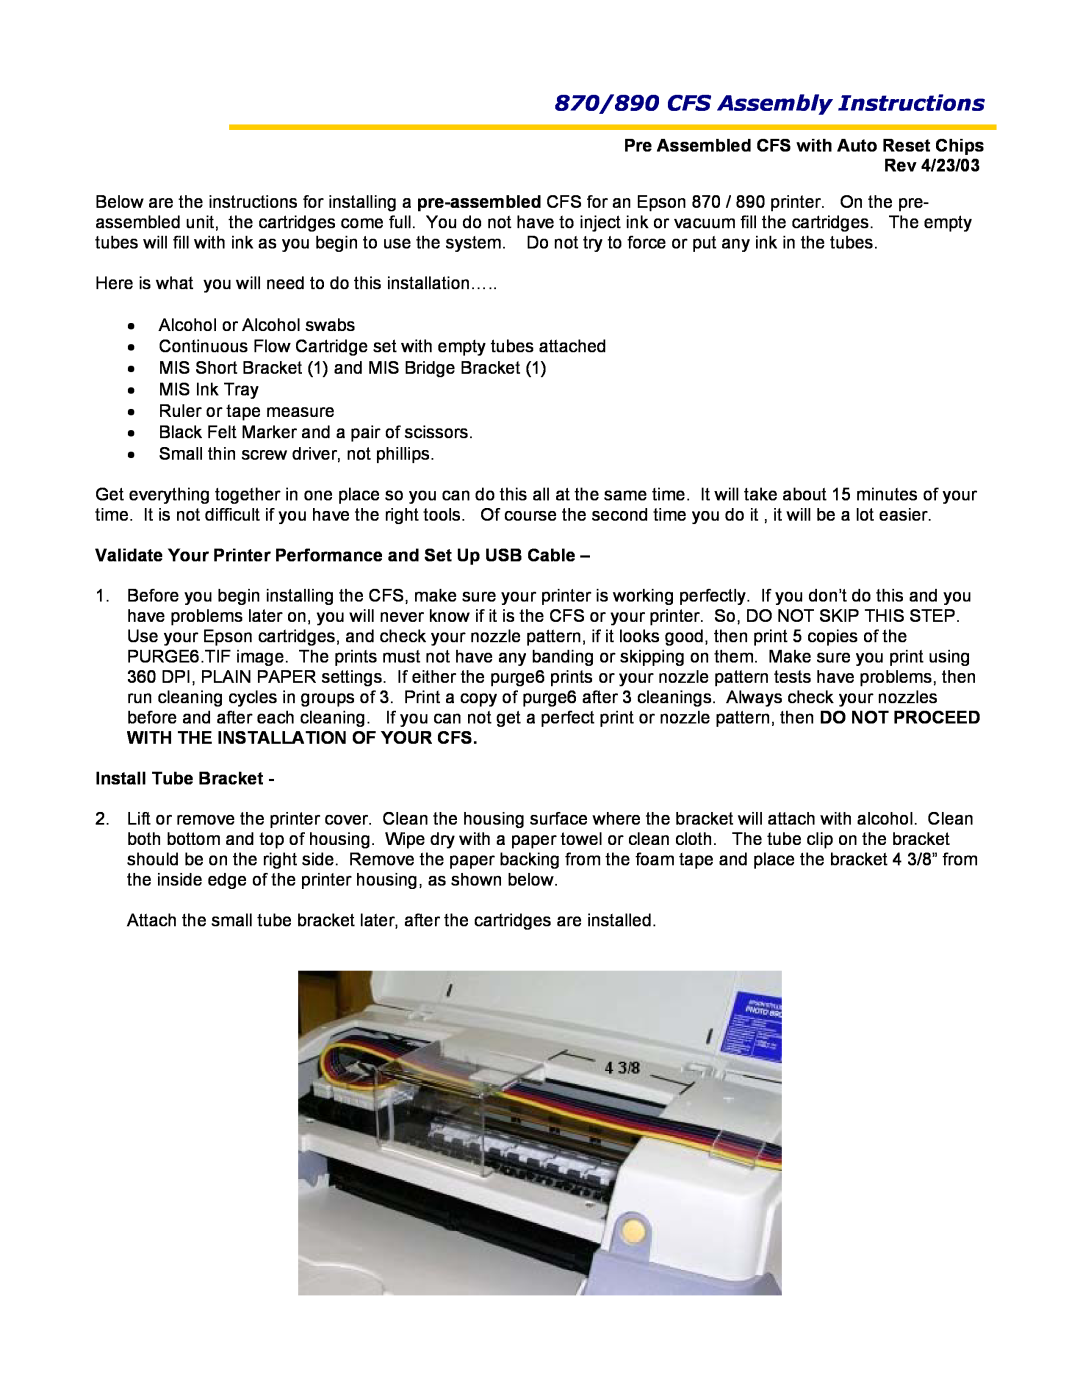 Epson manual Pre Assembled CFS with Auto Reset Chips Rev 4/23/03, 870/890 CFS Assembly Instructions 